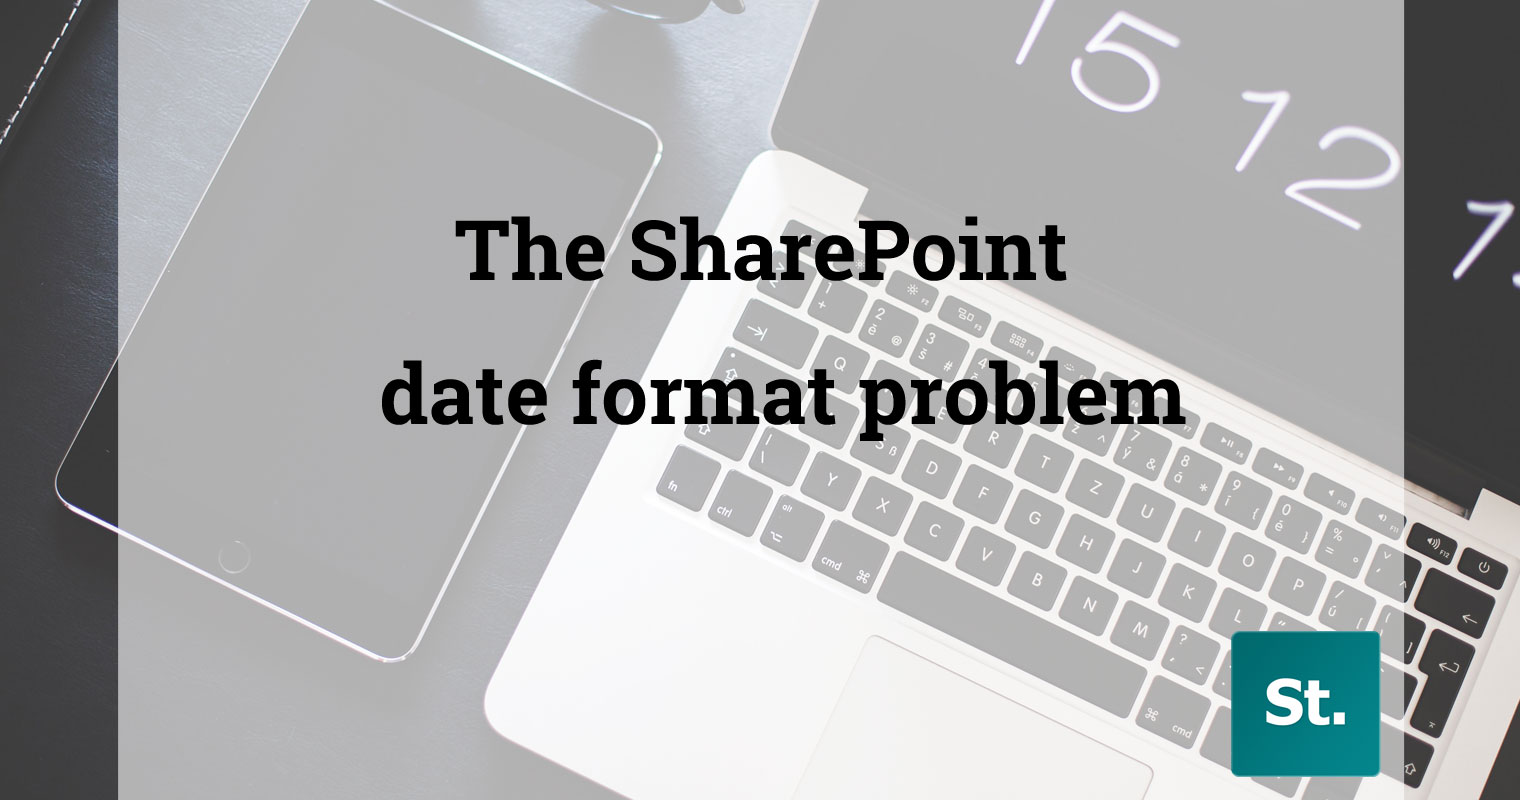 The SharePoint date format problem